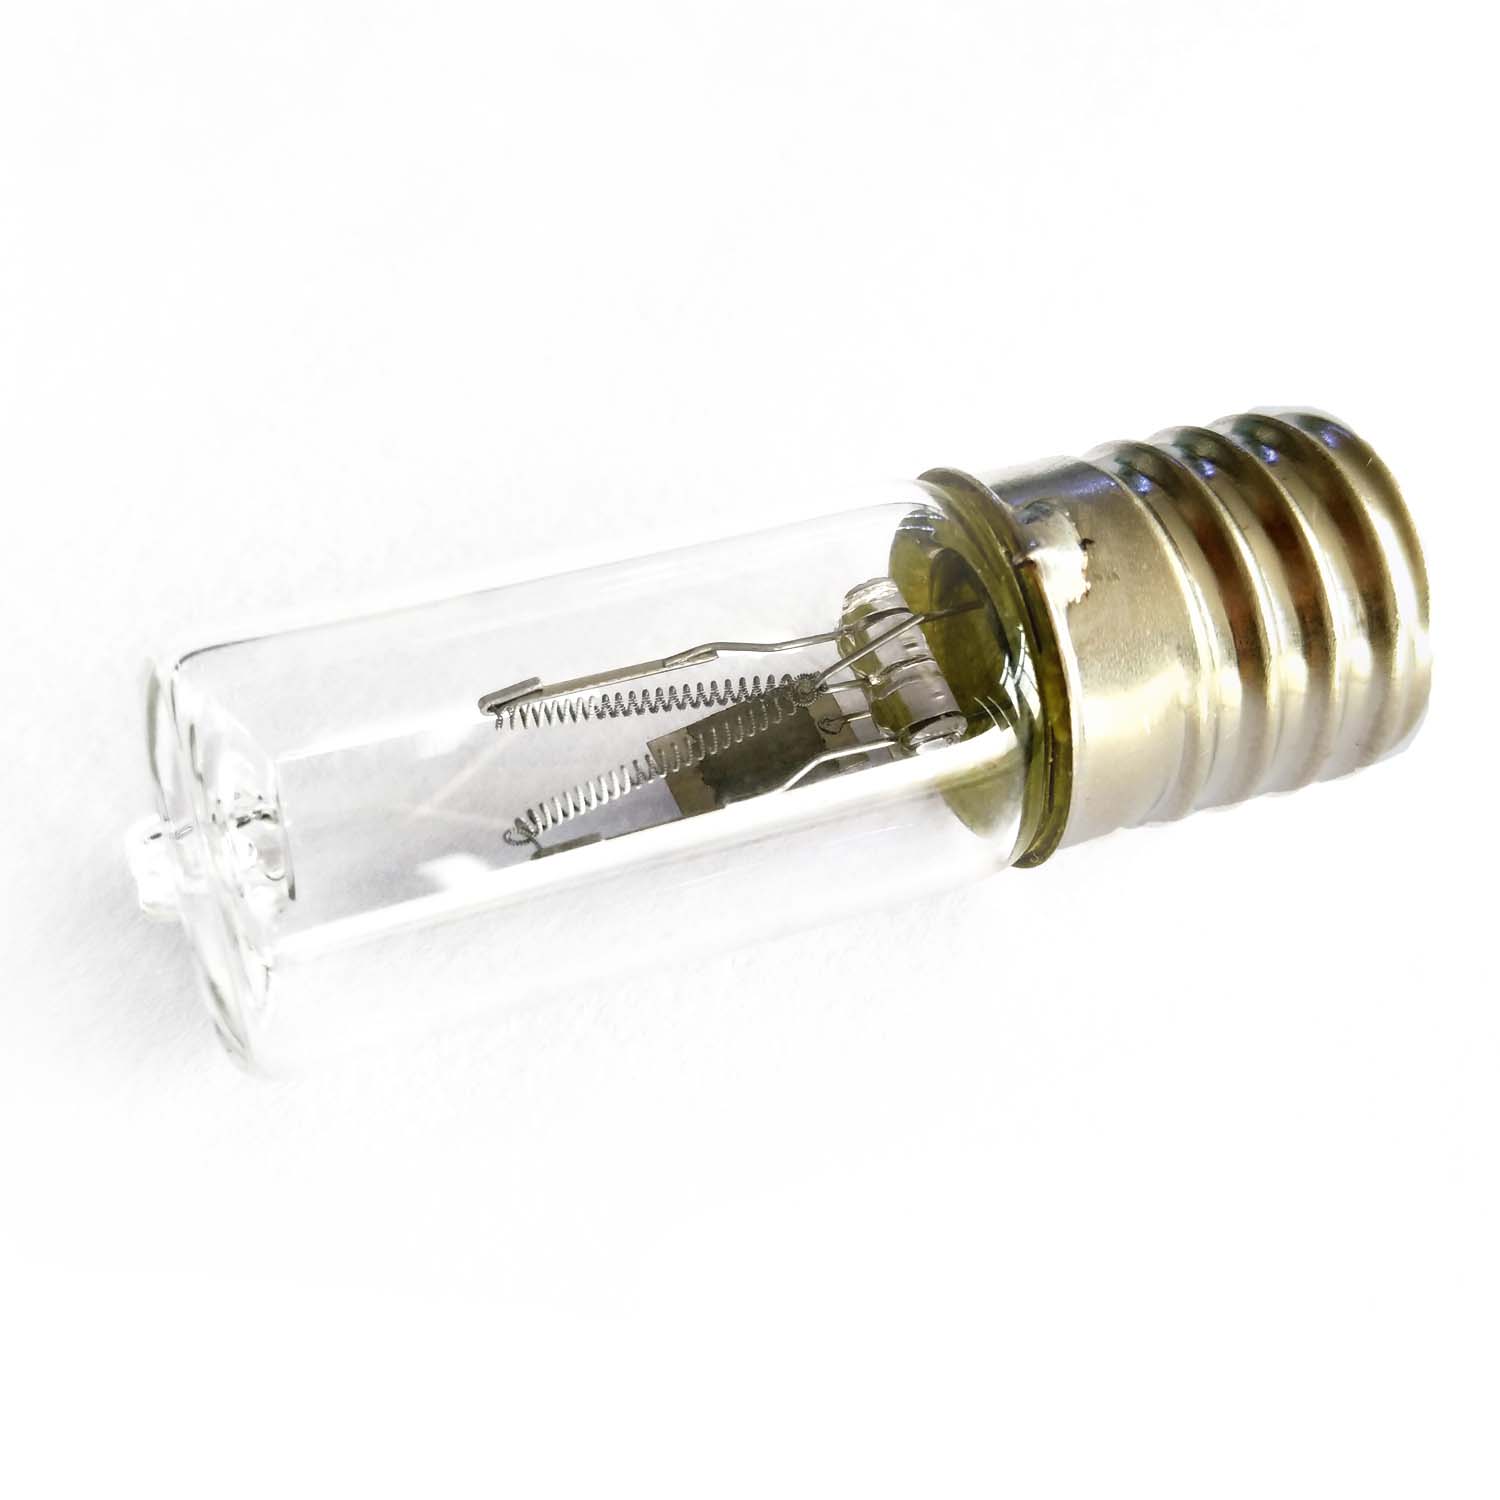 LiangYueLiang uvc ultraviolet germicidal lamp bulbs for underground water recycling-4